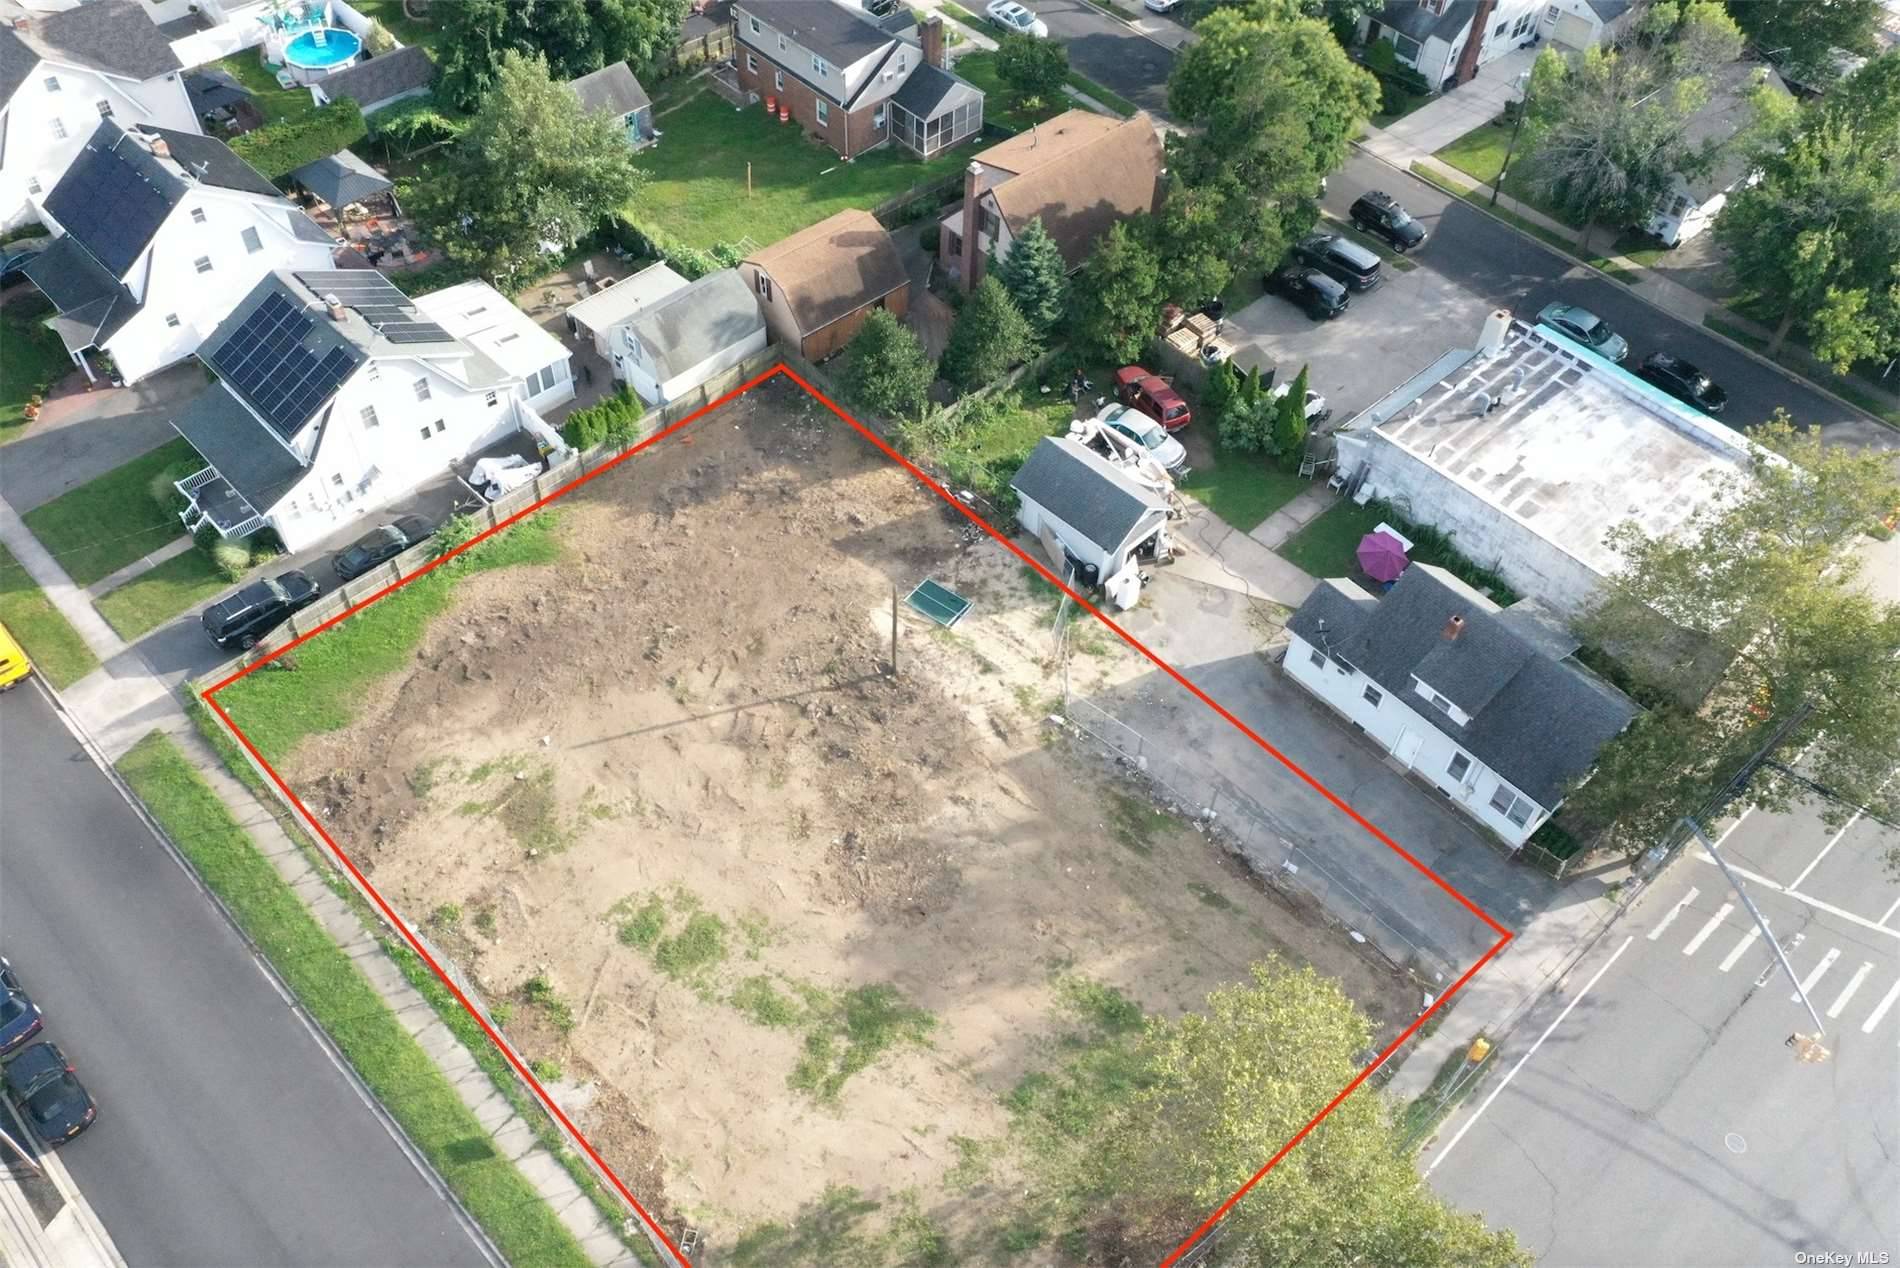 This buildable corner lot, which is in the process of being divided for two houses, is full of potential.